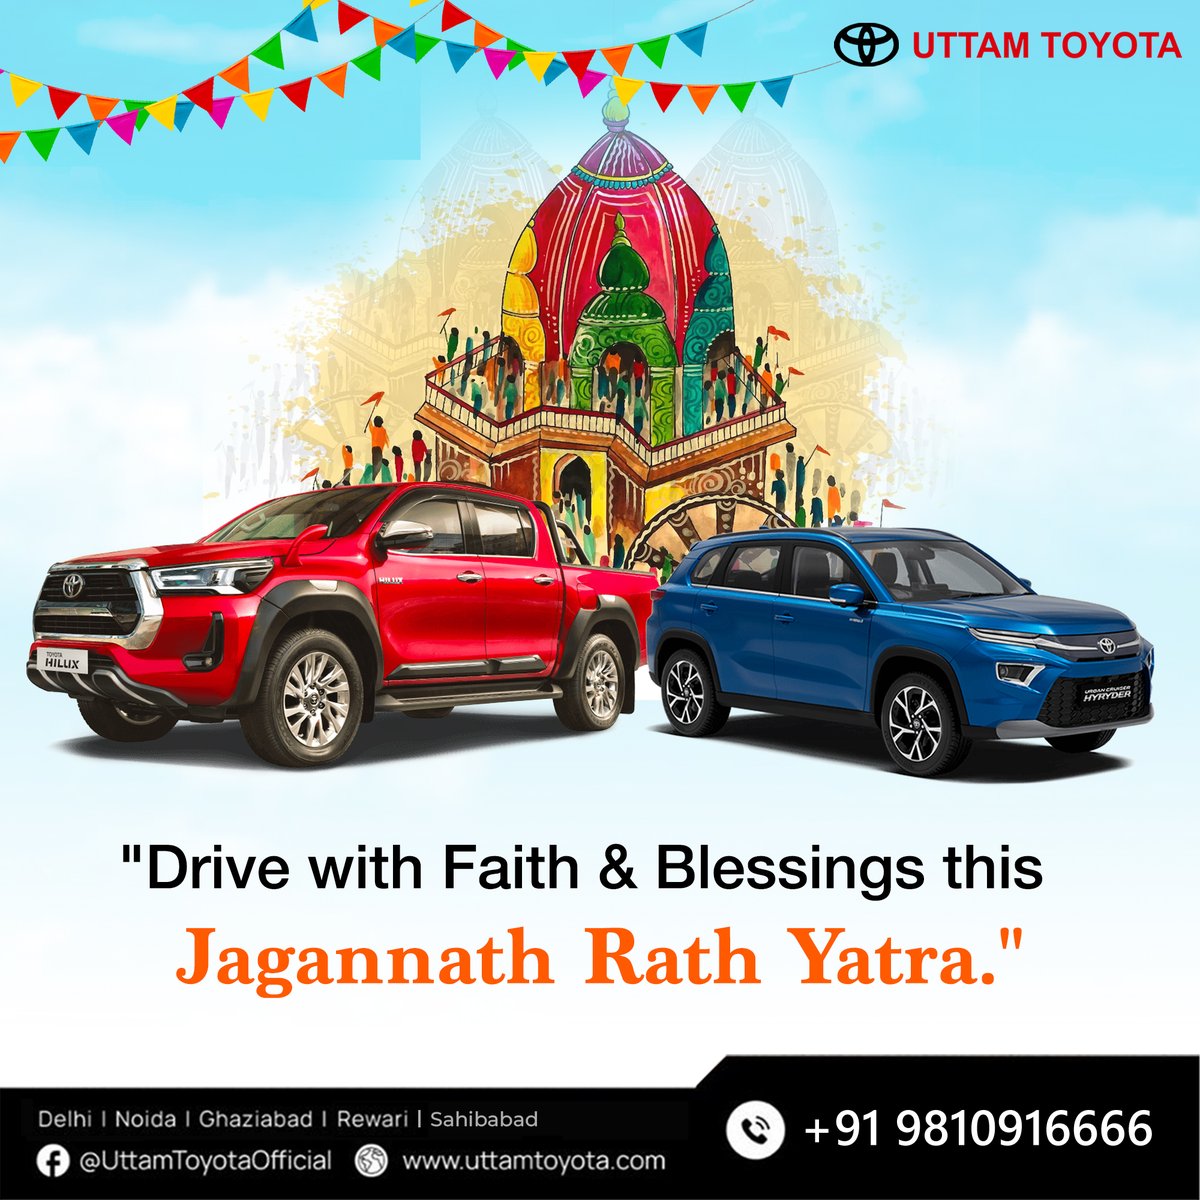 May the blessings of Lord 'Jagannath' bring joy, prosperity, and harmony to your life. Uttam Toyota wishes you a blissful and blessed Jagannath Yatra!
.
.
.
#jagannath #jagannathtemple #jagannathyatra #uttamtoyota #TOYOTA #ToyotaIndia #Glanza #hilux #FortunerLegender